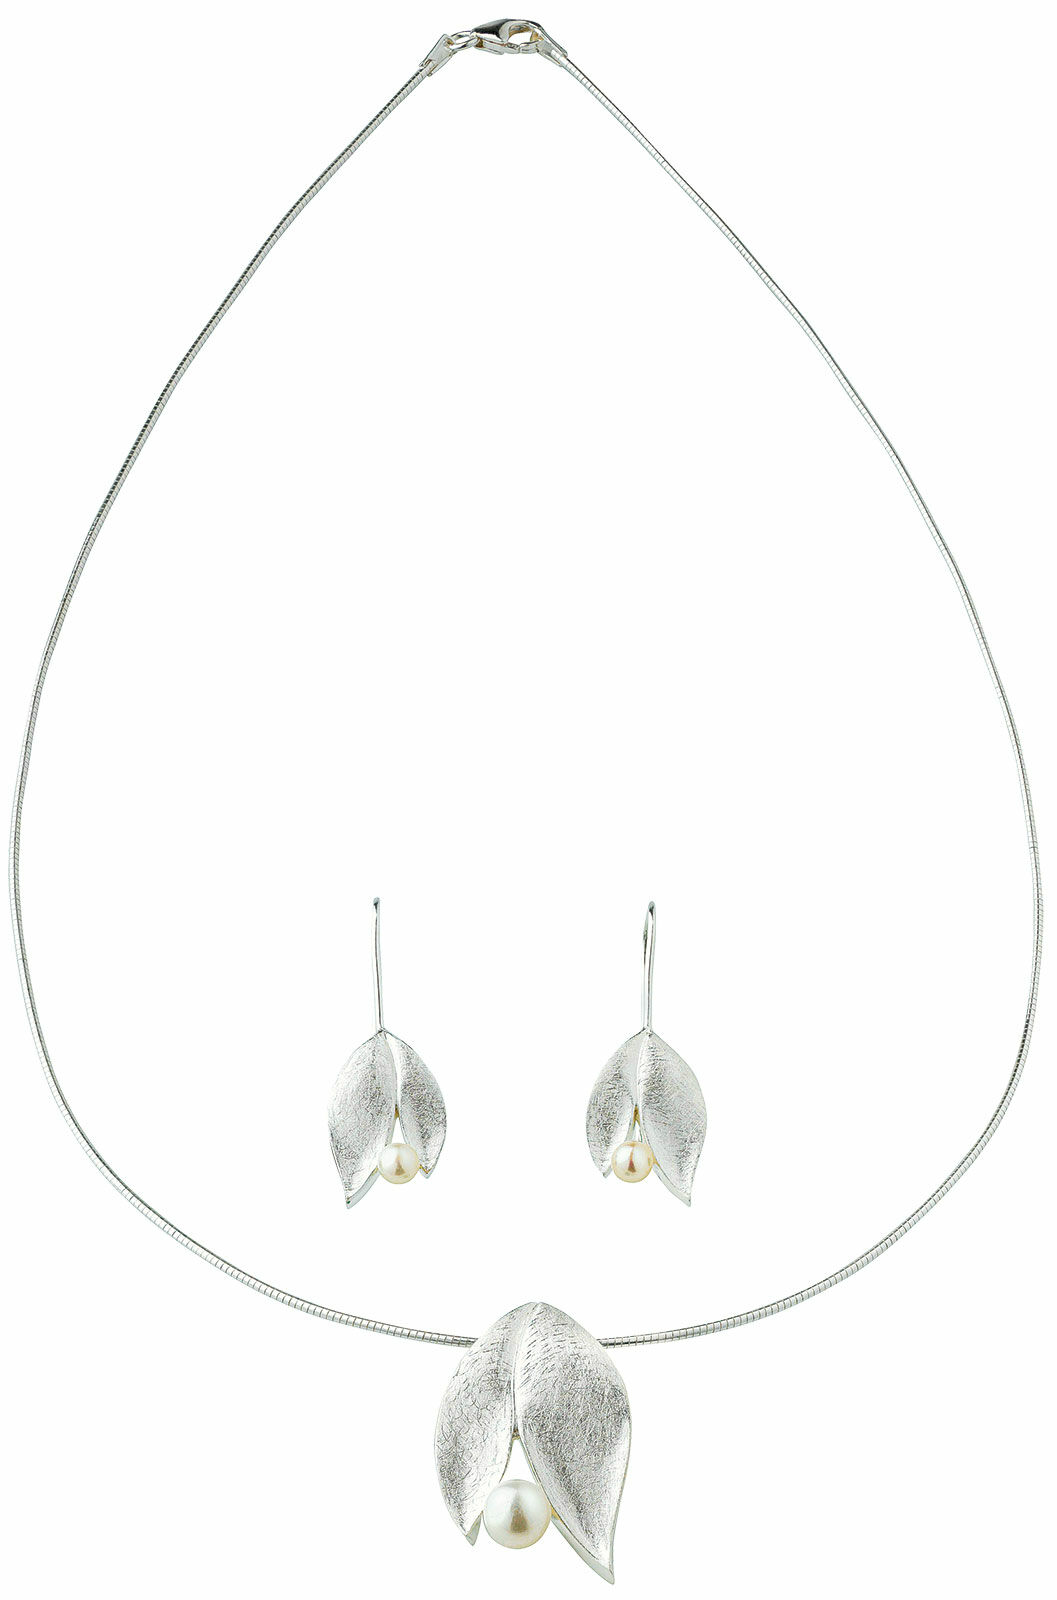 Jewellery set "Silver Leaf" with pearls